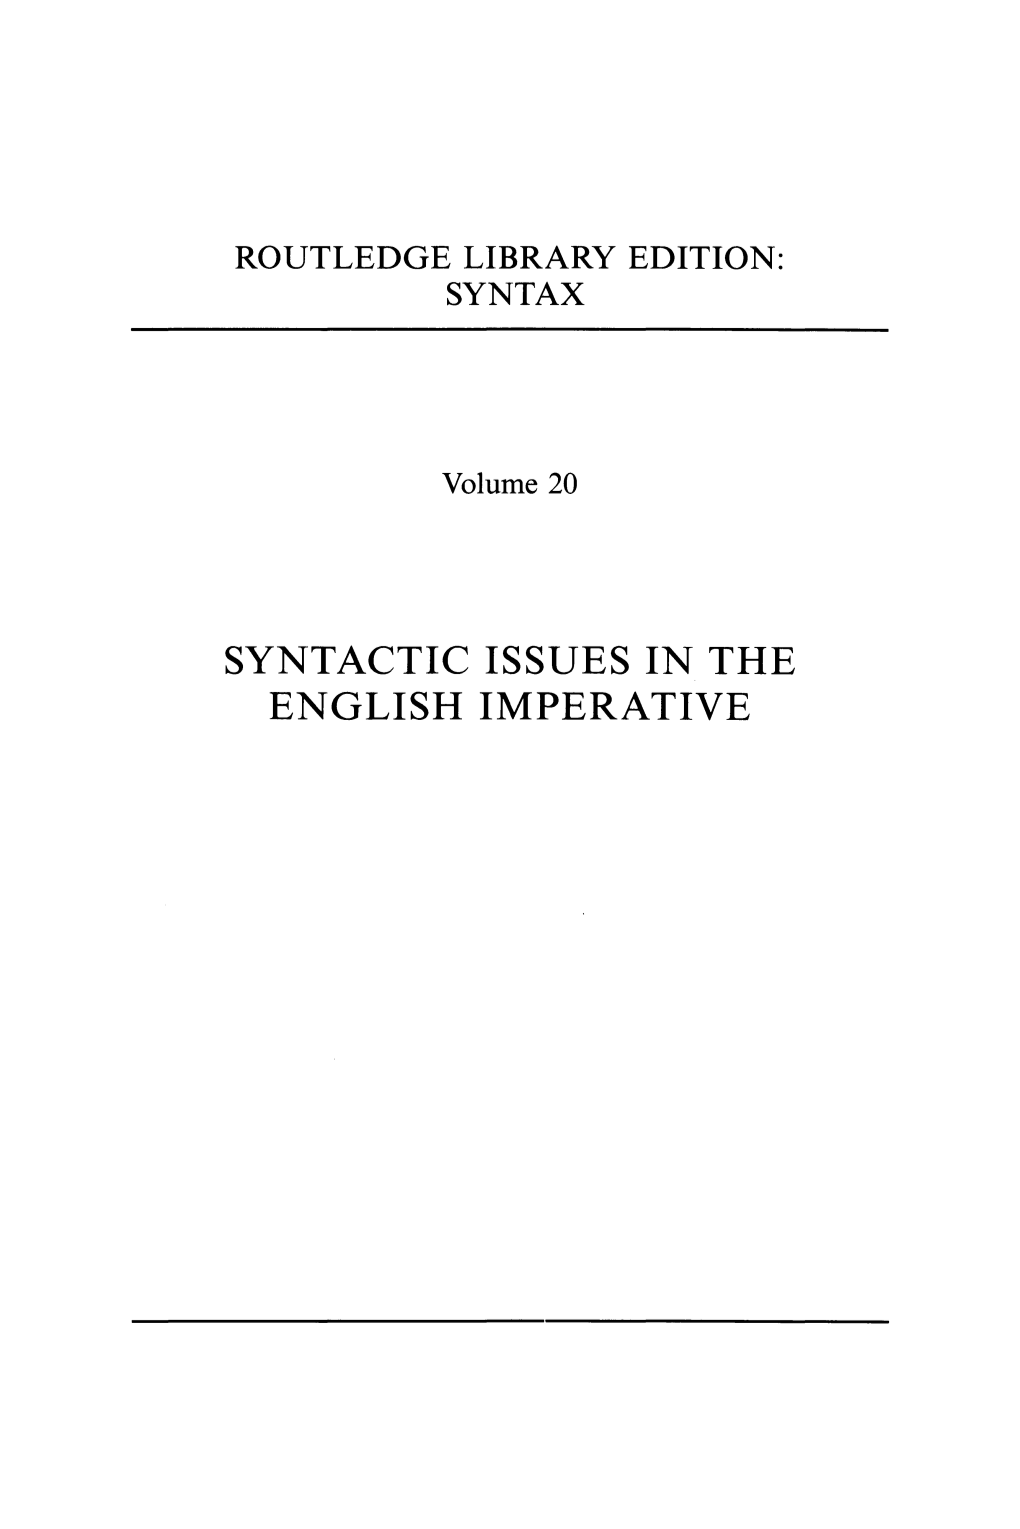 Syntactic Issues in the English Imperative